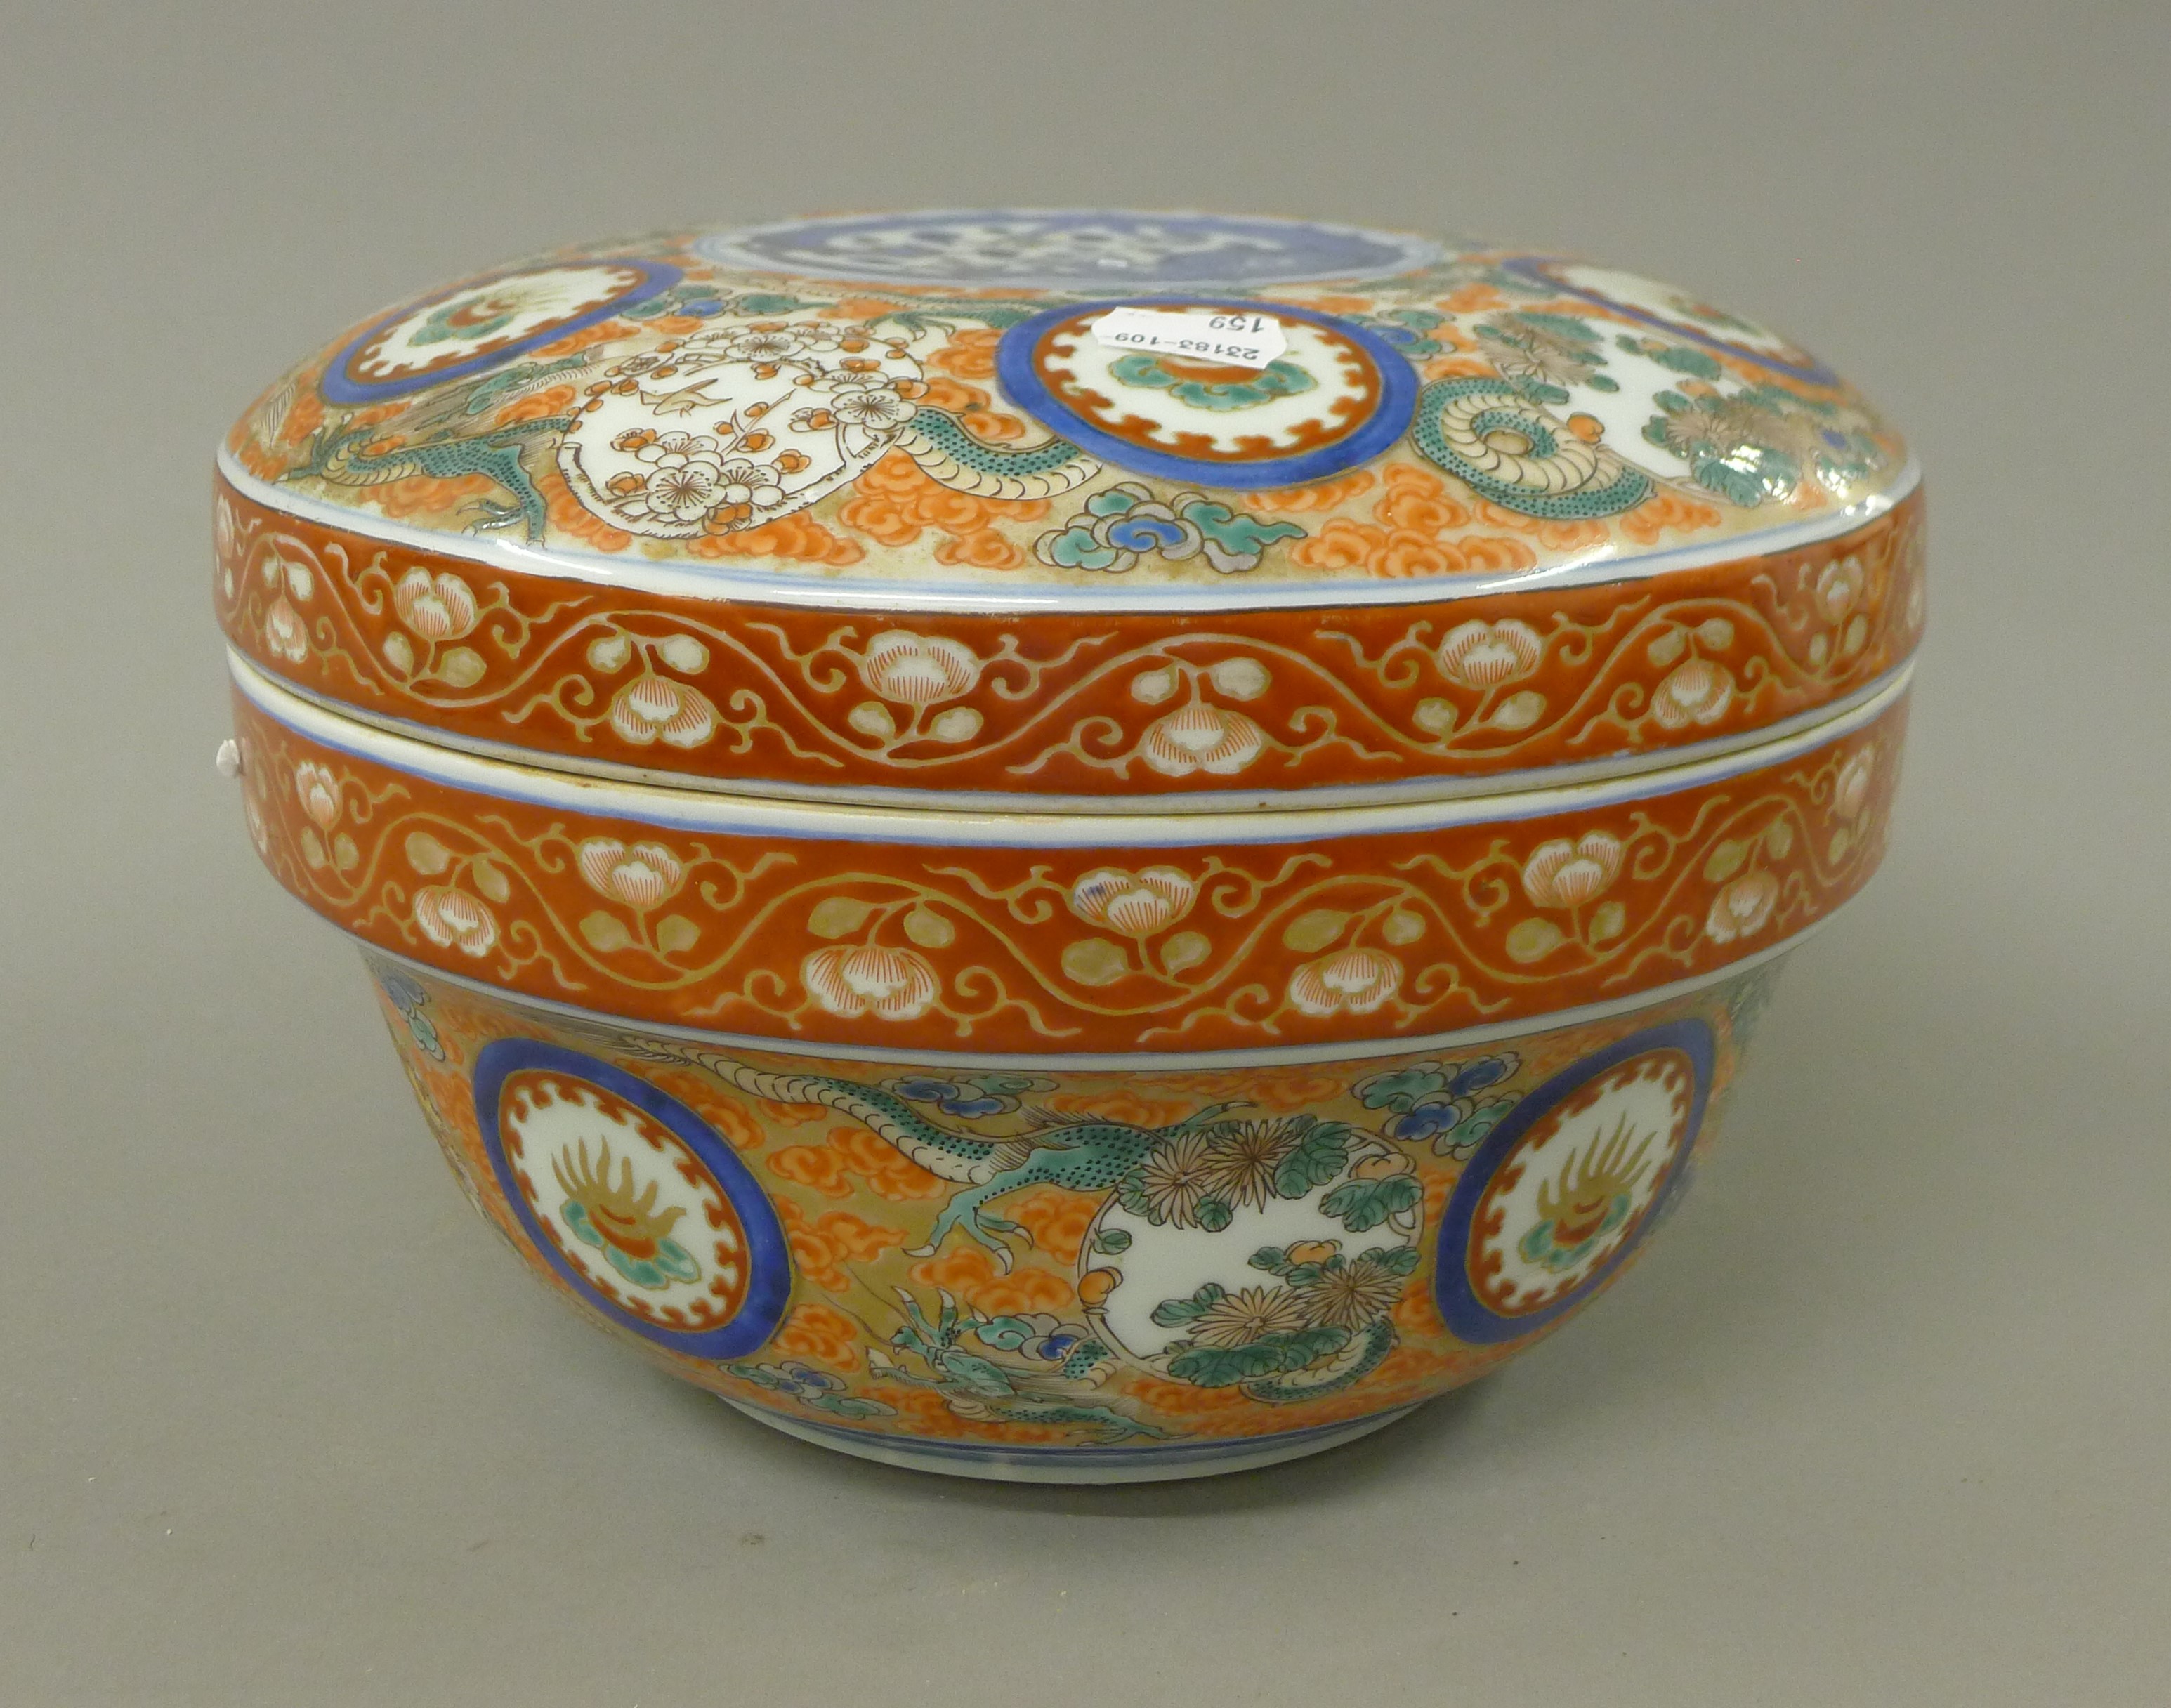 A Chinese porcelain orange lidded tureen decorated with dragons. 18 cm high.